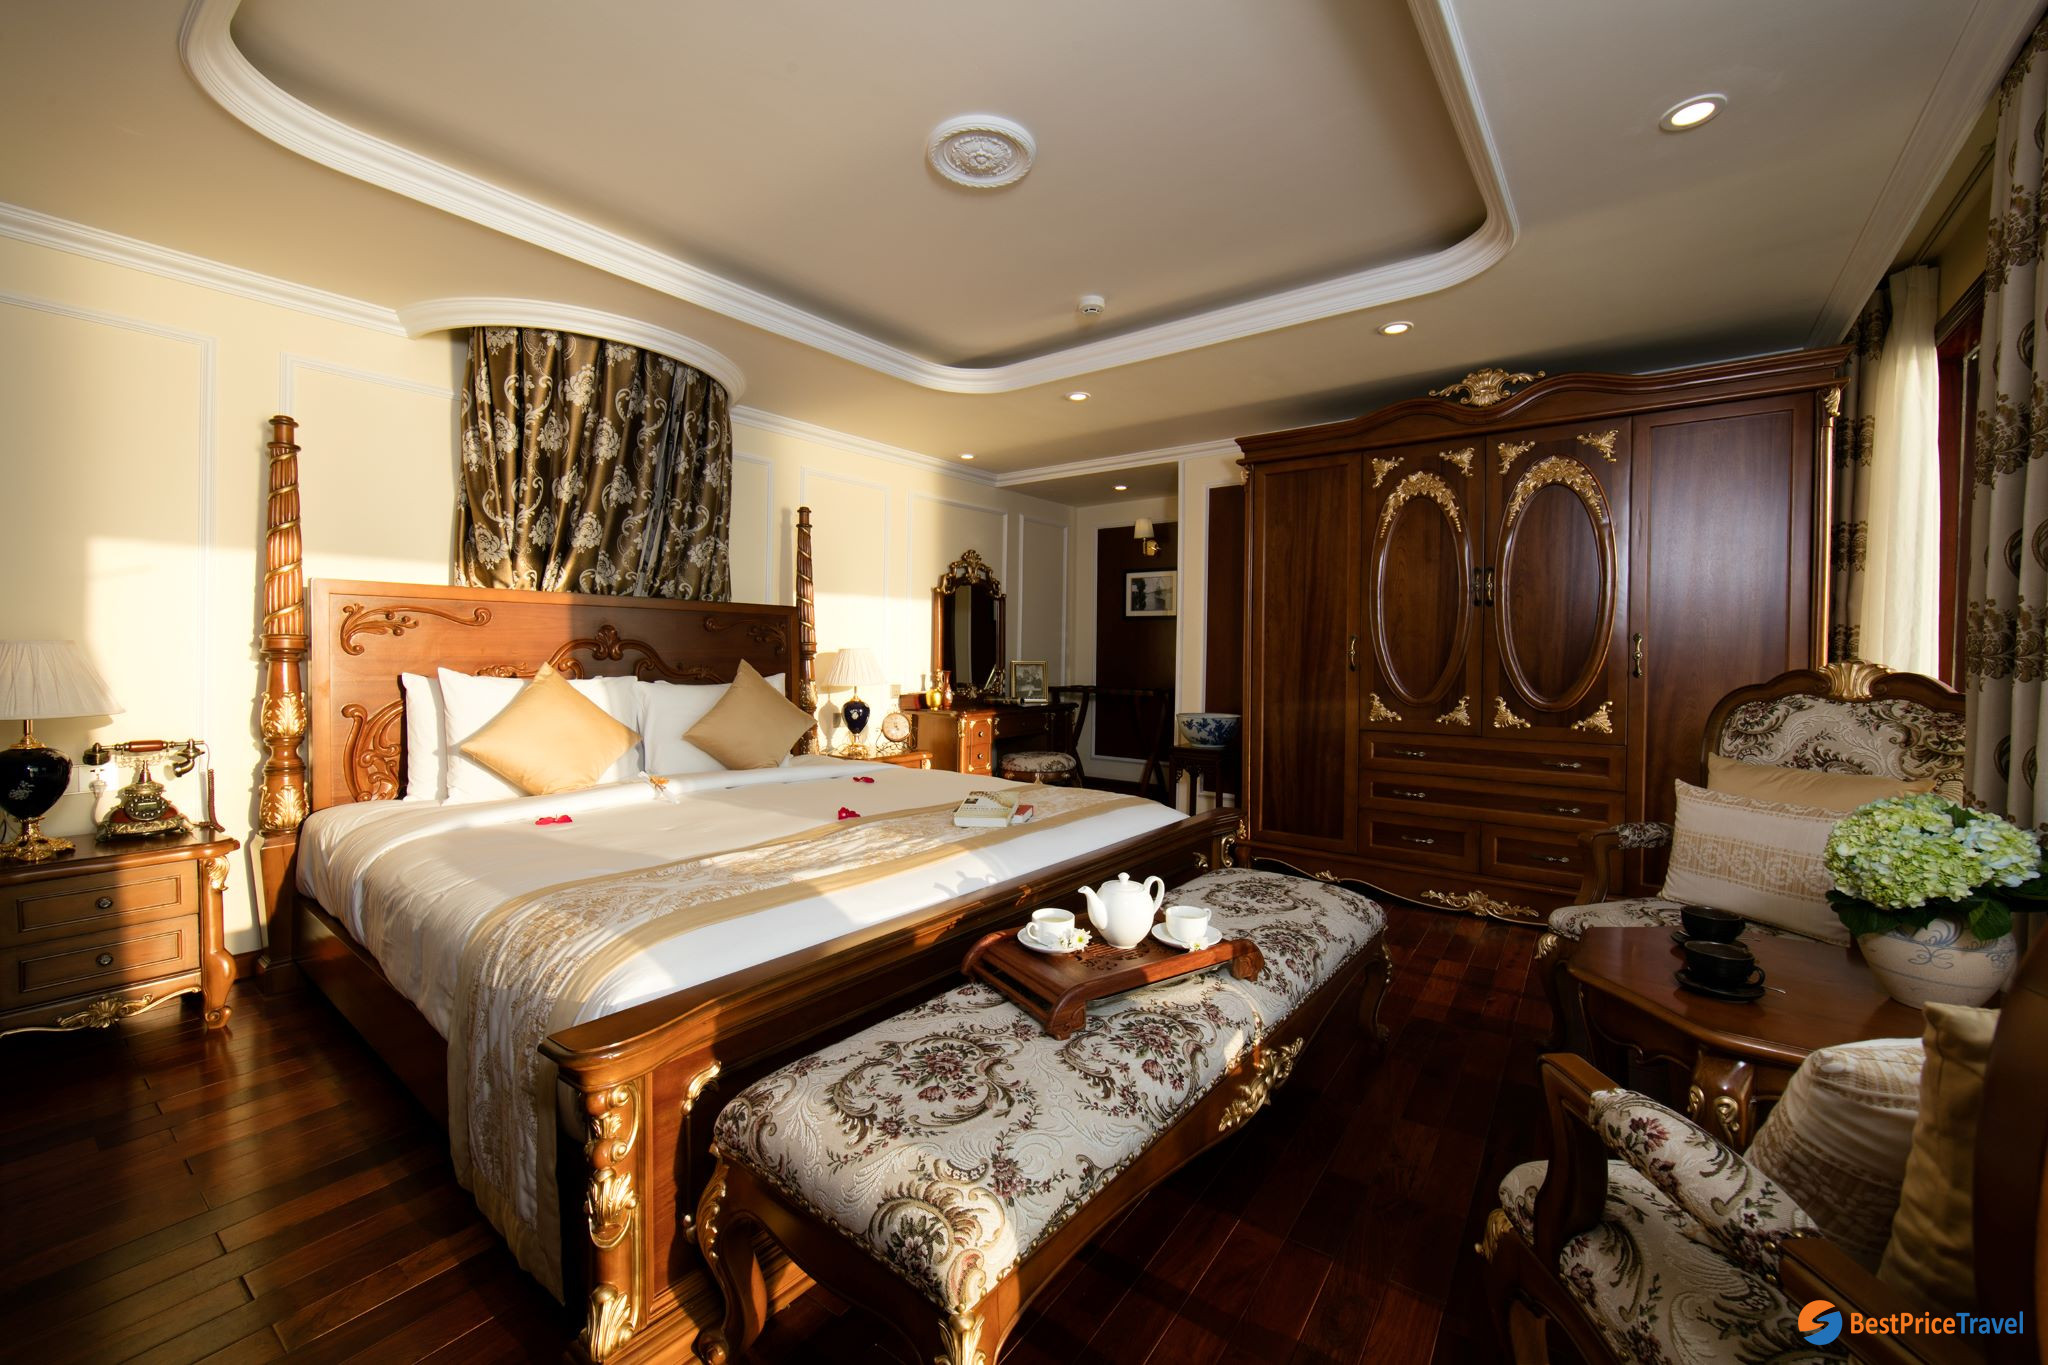 Royal Suite with traditional decor